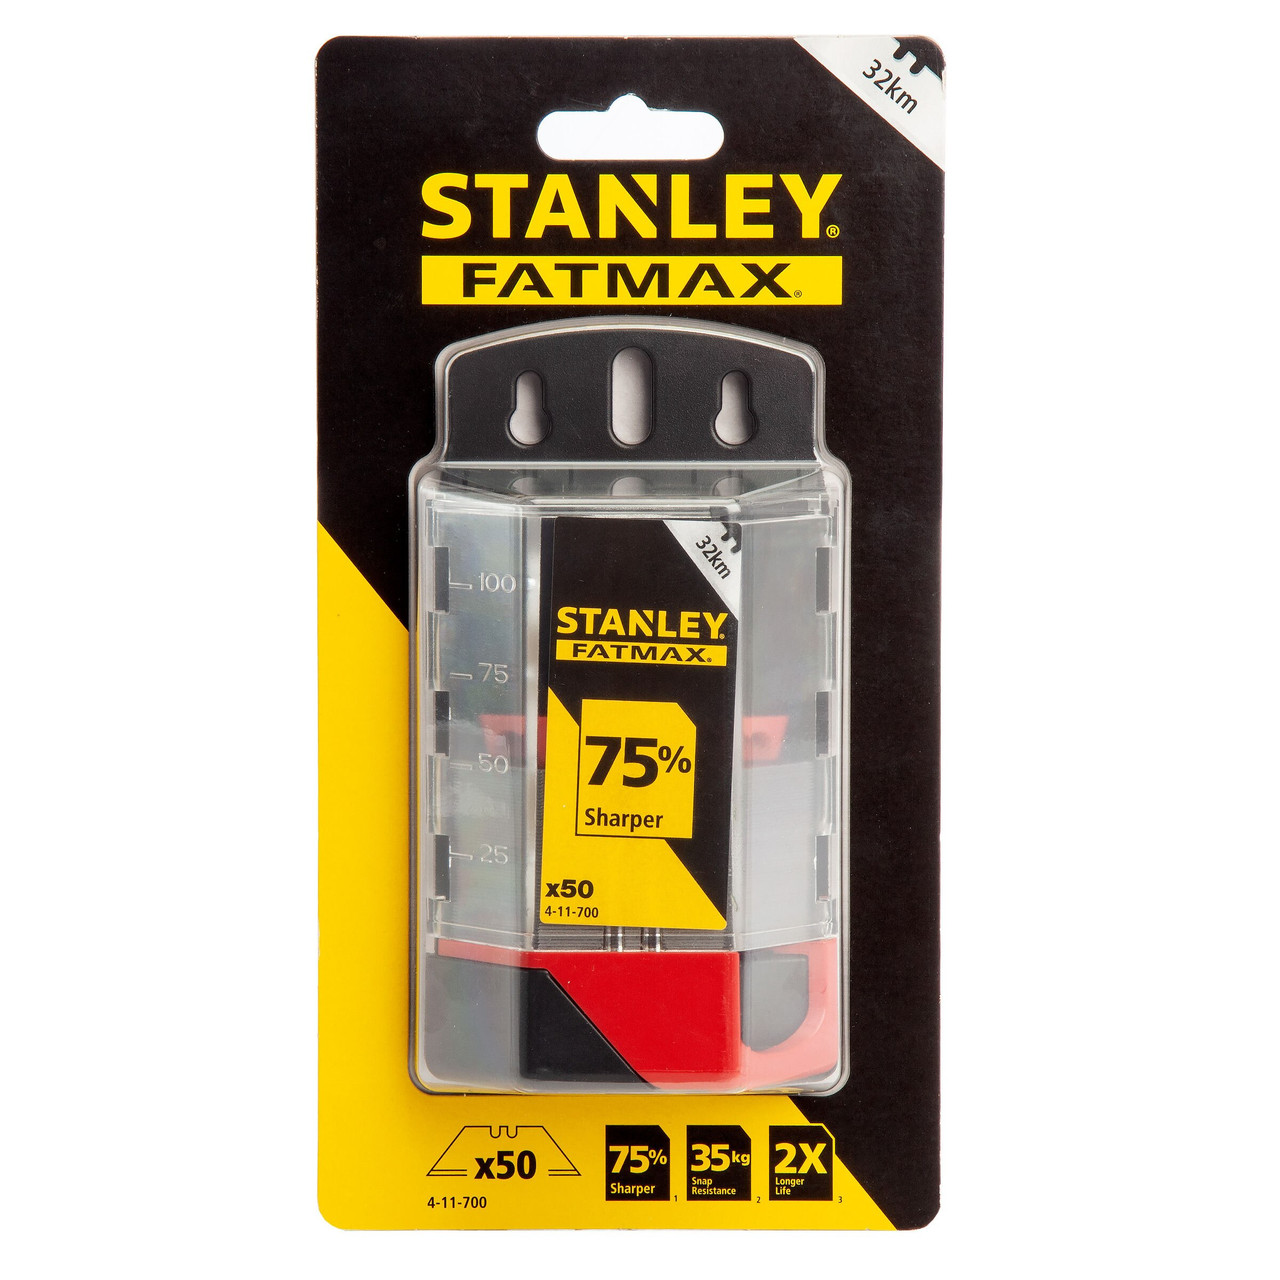 STANLEY FATMAX UTILITY BLADES 50 PACK